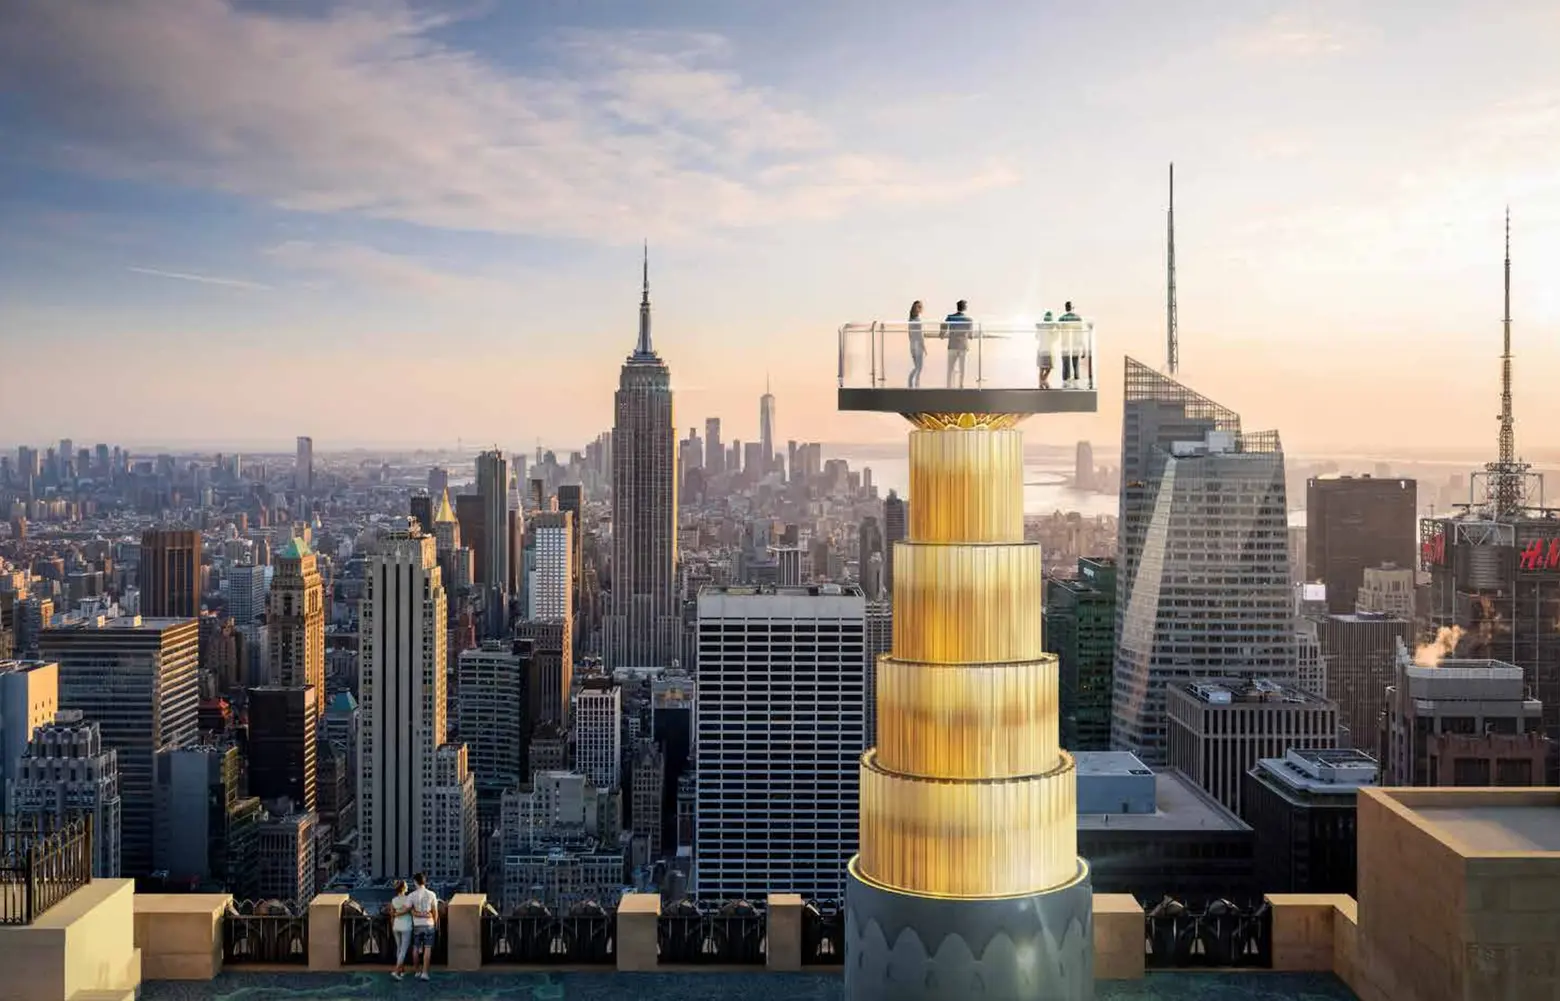 30 Rock’s new ‘skylift’ observation platform and rooftop ride approved by Landmarks